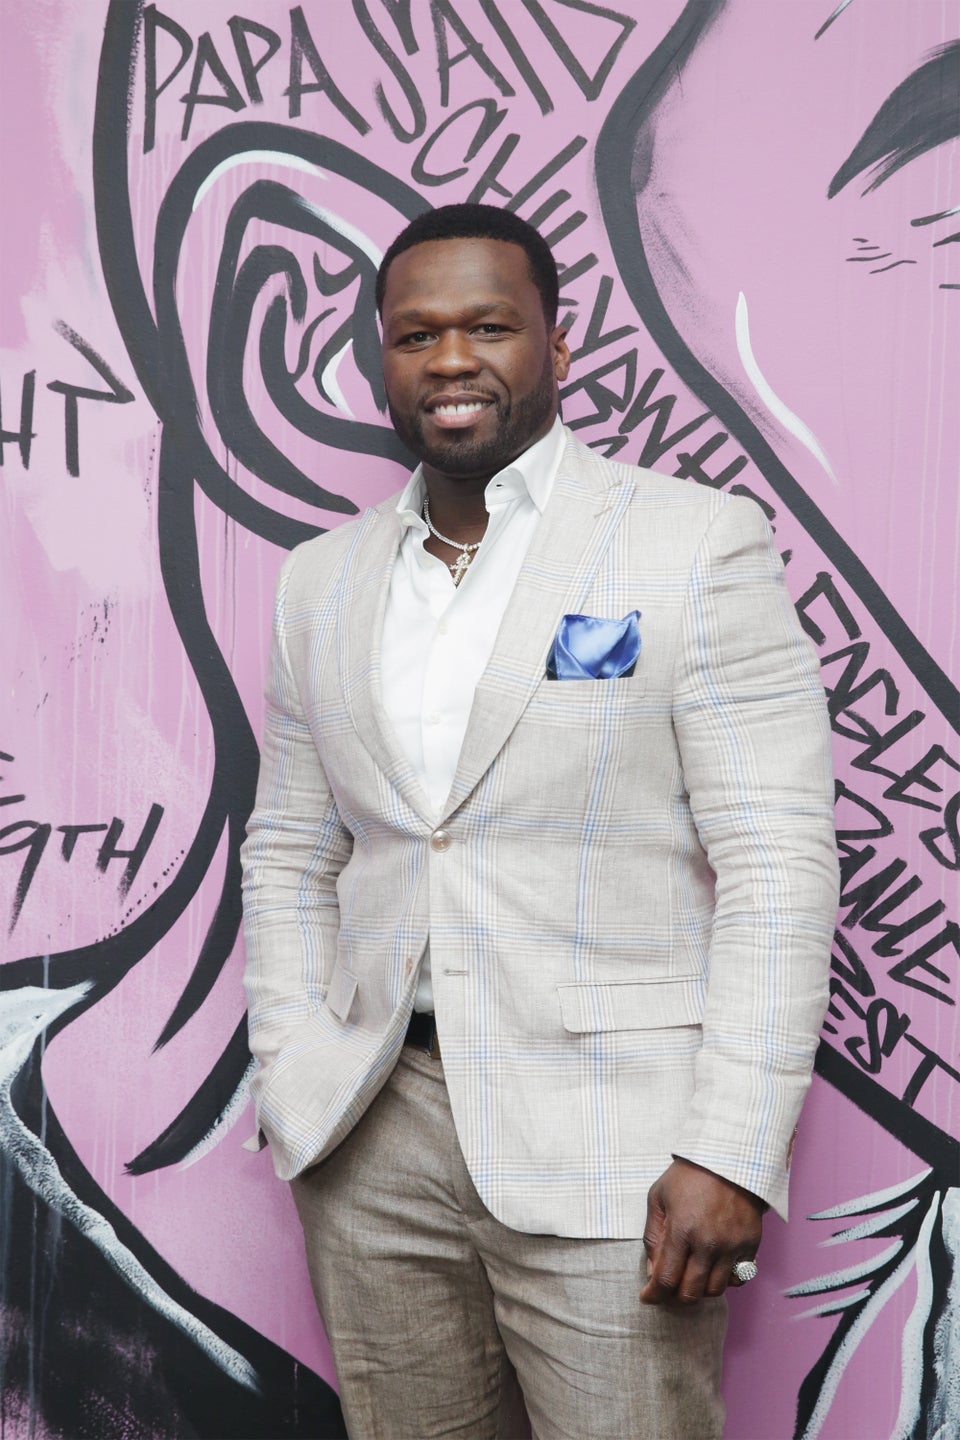 50 Cent Says He Would ‘Never Make Fun Of Any Sexual Assault Victim’ After Backlash Over Terry Crews Comments